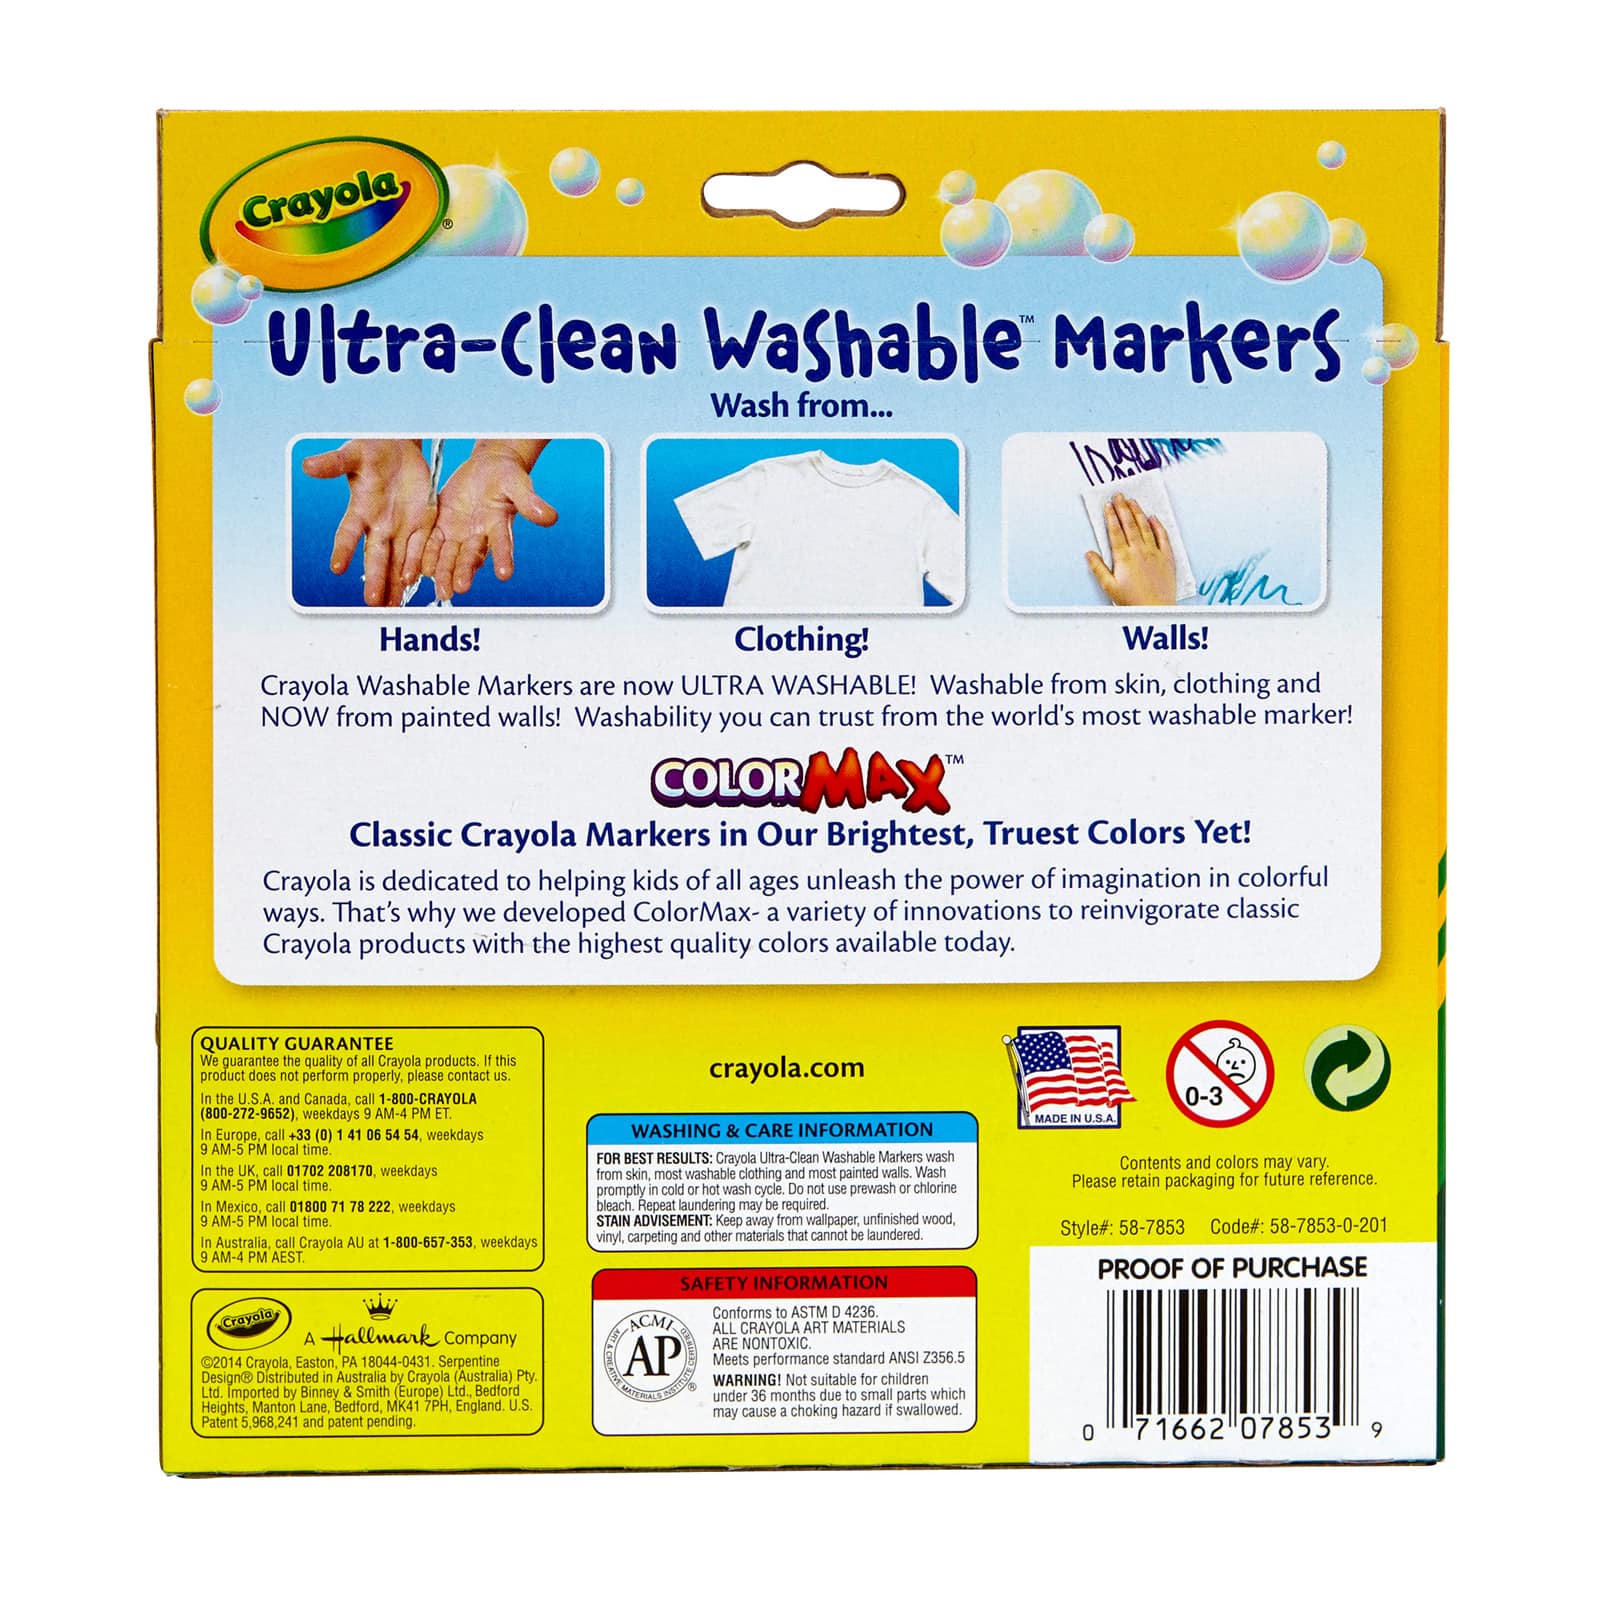 12 Packs: 10ct. (120 total) Crayola® Ultra-Clean Broad Line Classic Color  Markers